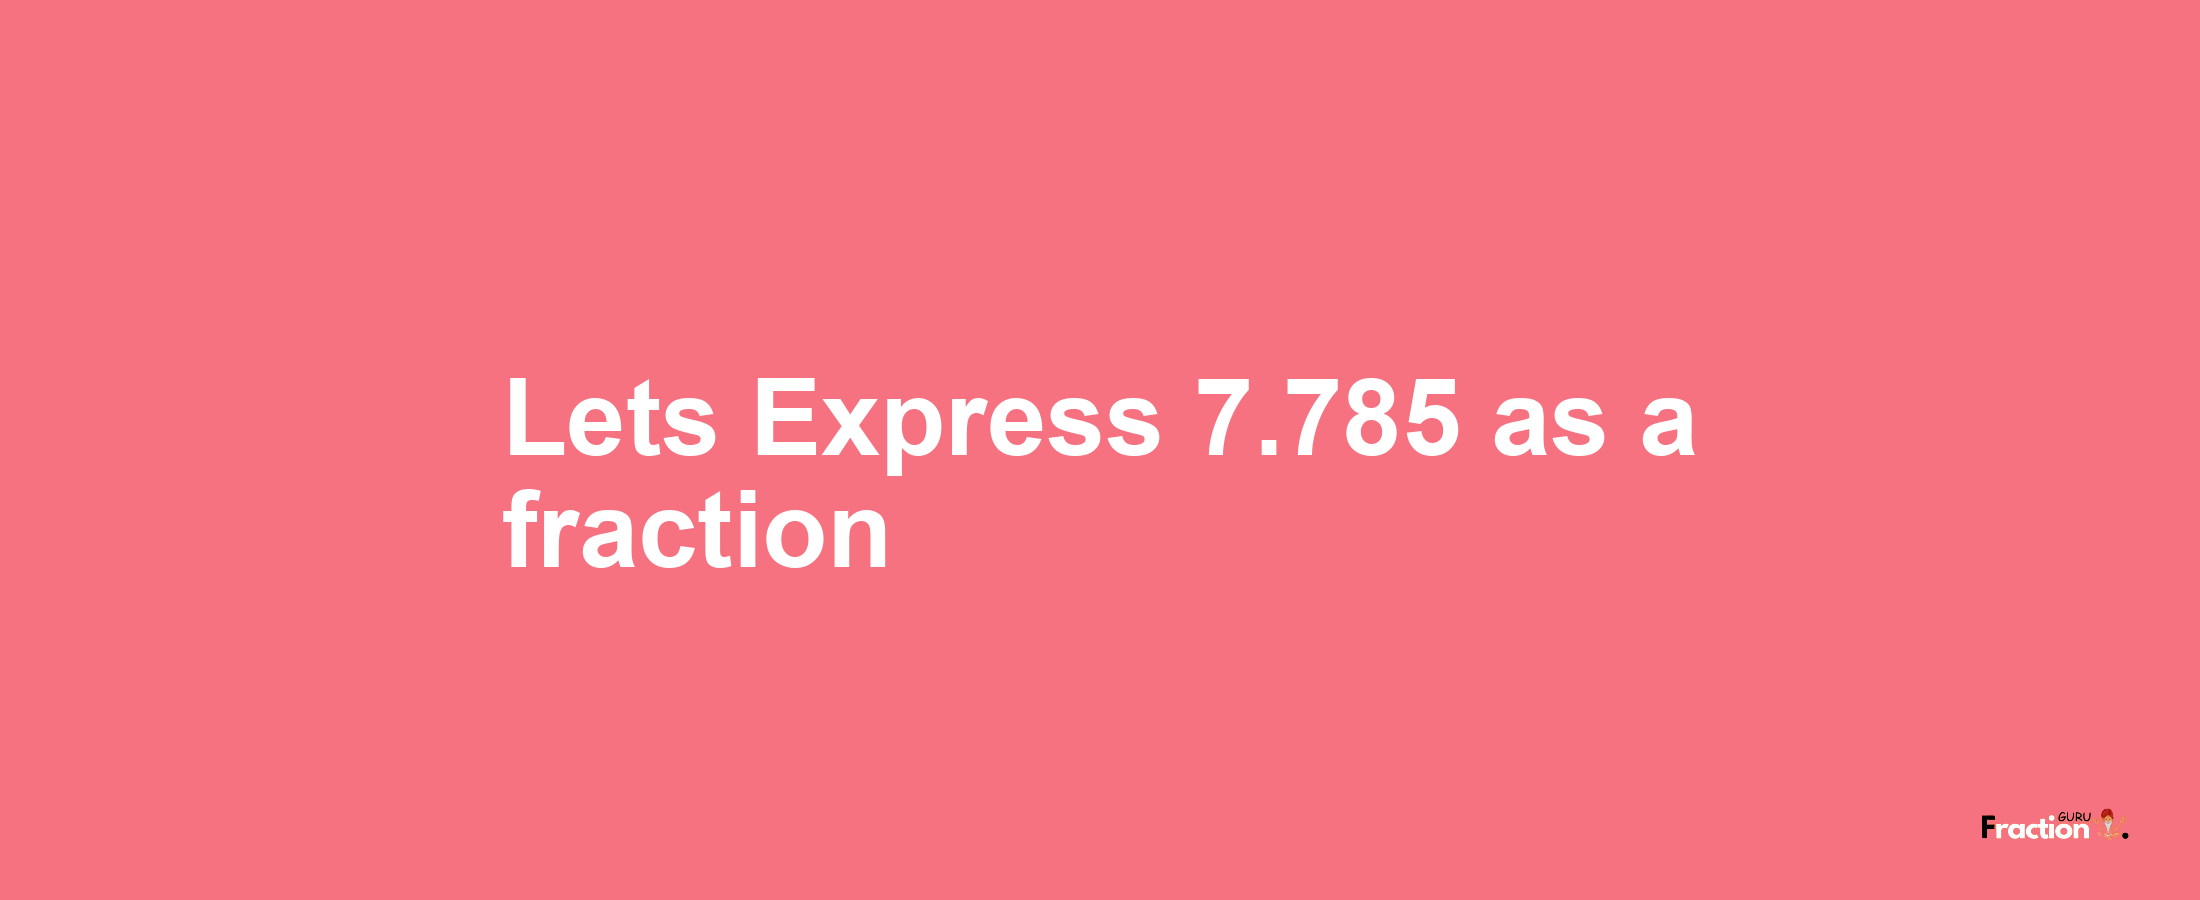 Lets Express 7.785 as afraction